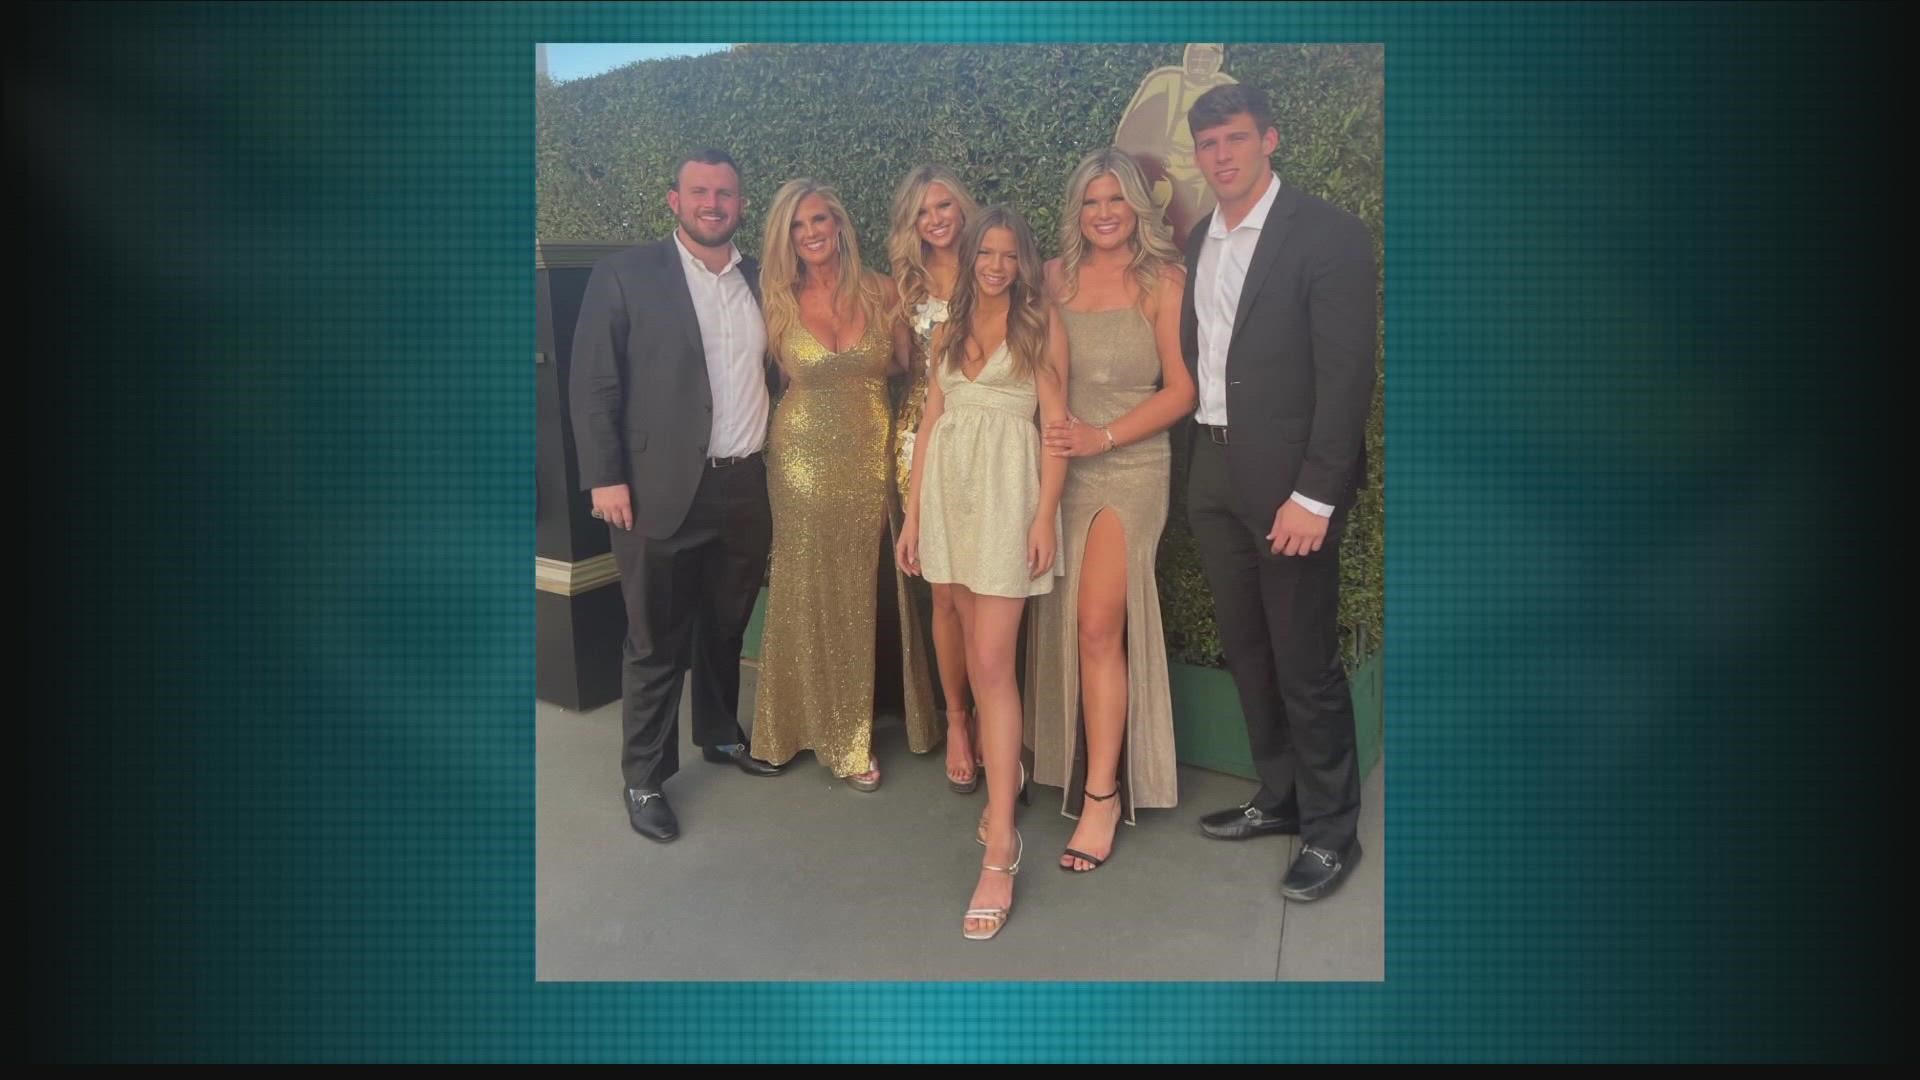 Tony Boselli himself didn't know he'd made it into the Pro Football Hall of Fame.  But his family did. And they pulled off quite the surprise.